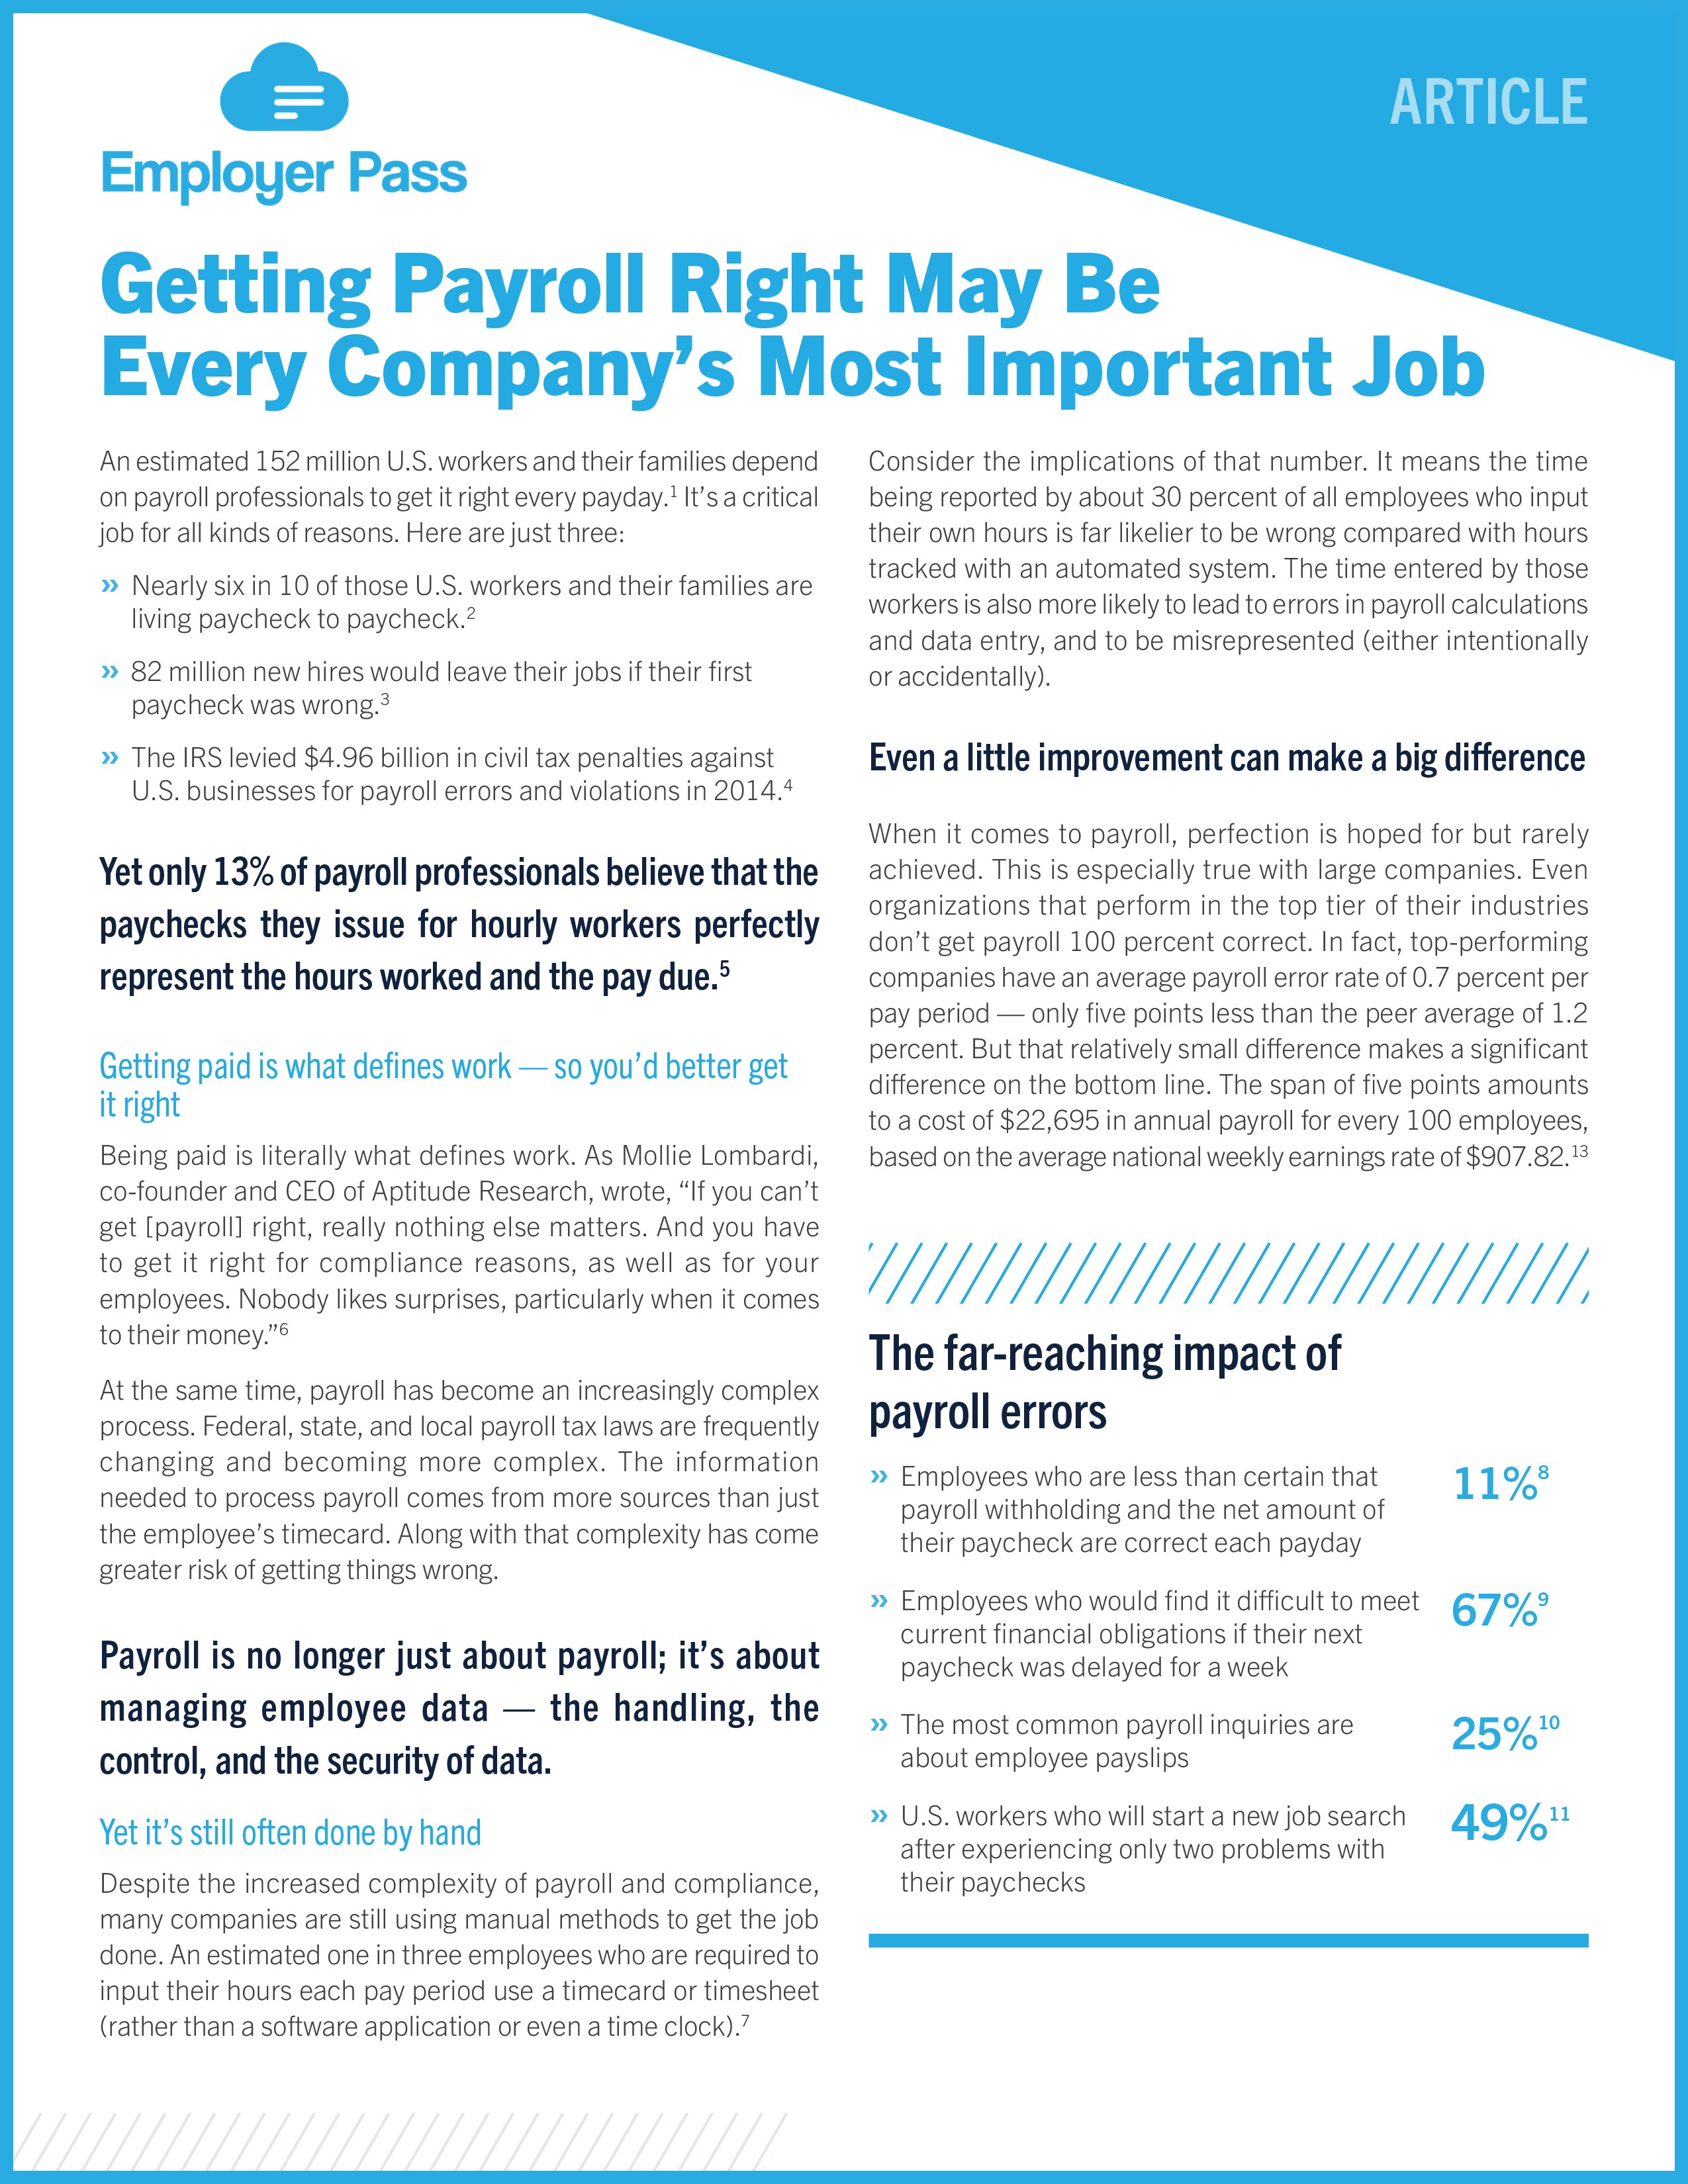 Reduce Payroll Errors to Get Payroll Right Article Cover